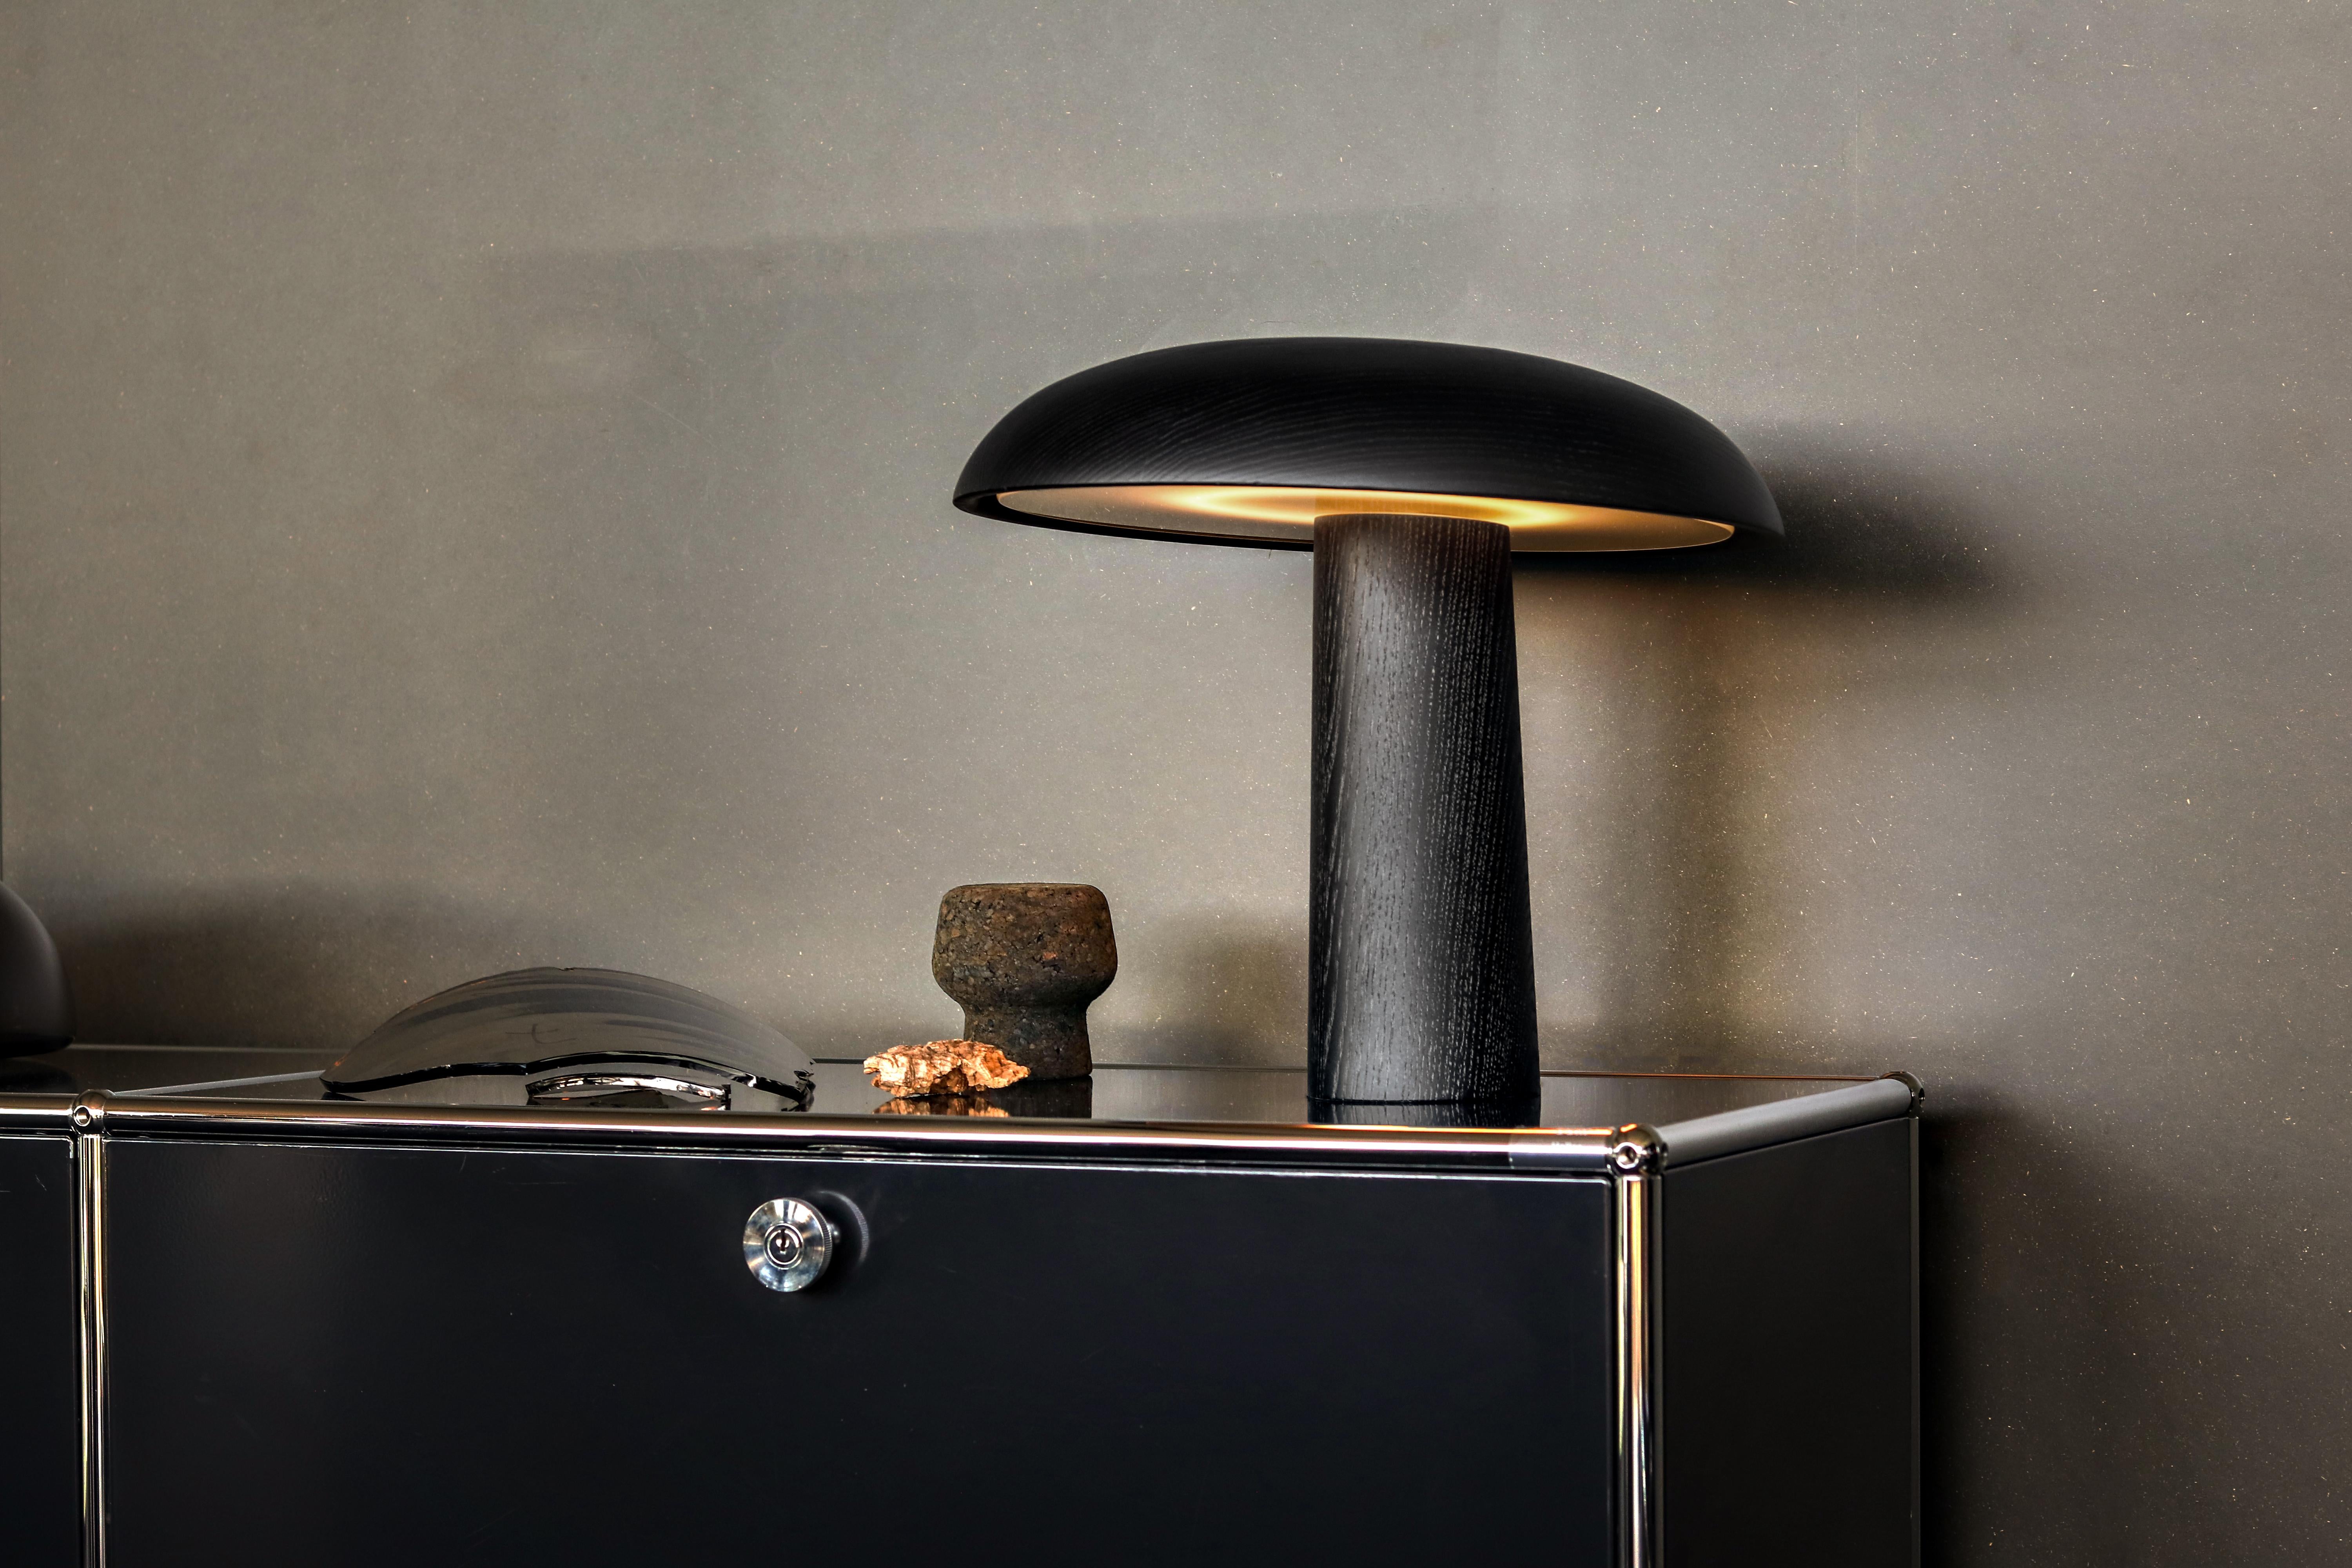 Table lamp. Base and shade solid ash, natural with clear varnish or black
lacquered, or solid walnut, natural, with clear varnish. Satinised glass diffuser
panel. Infinitely dimmable with memory function. Felt gliders in black. Cable
length 2 m.